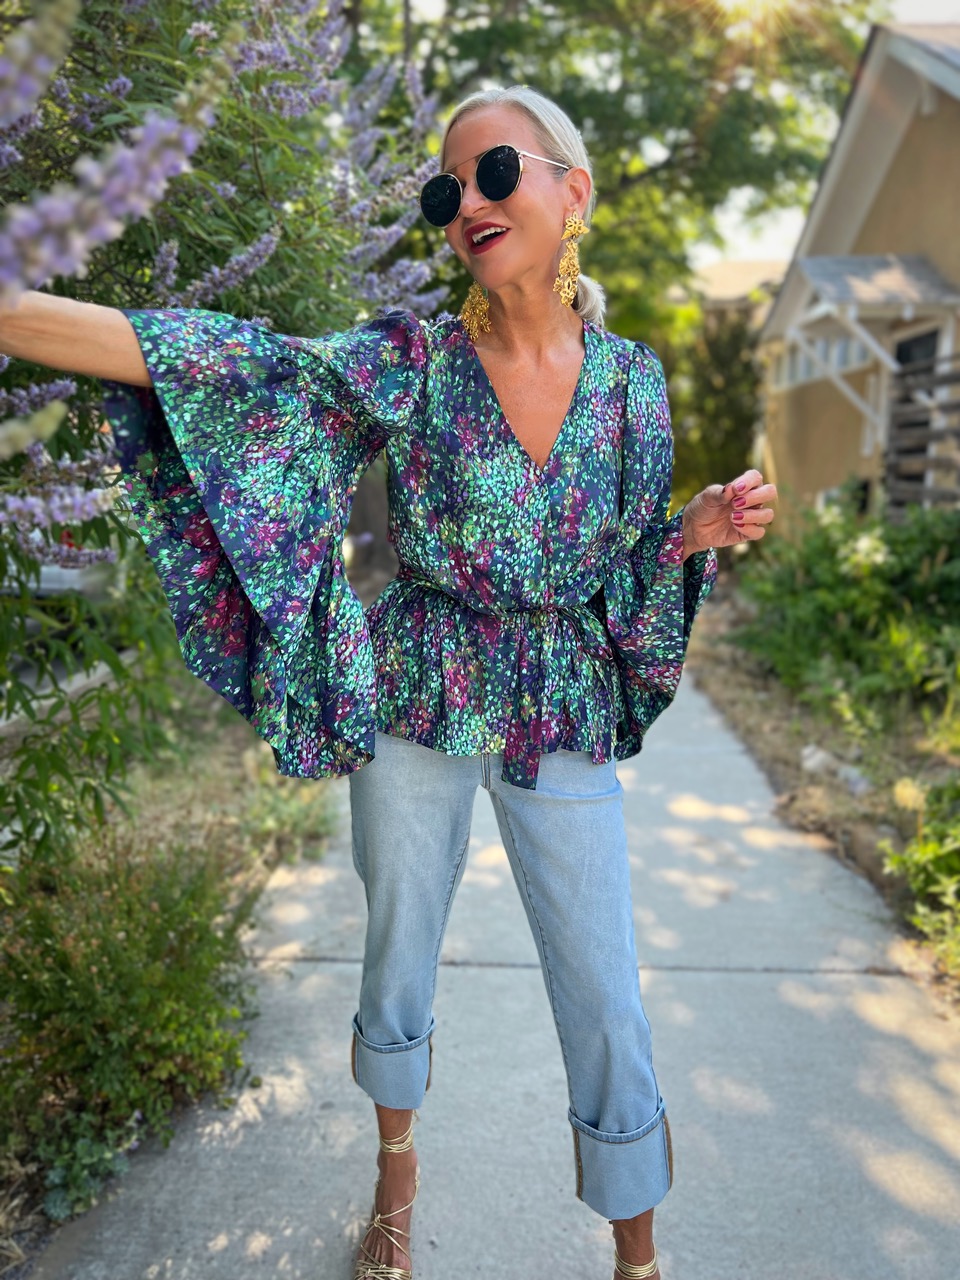 Lifestyle Influencer, Jamie Lewinger of More Than Turquoise wearing DG2 cuffed jeans from HSN